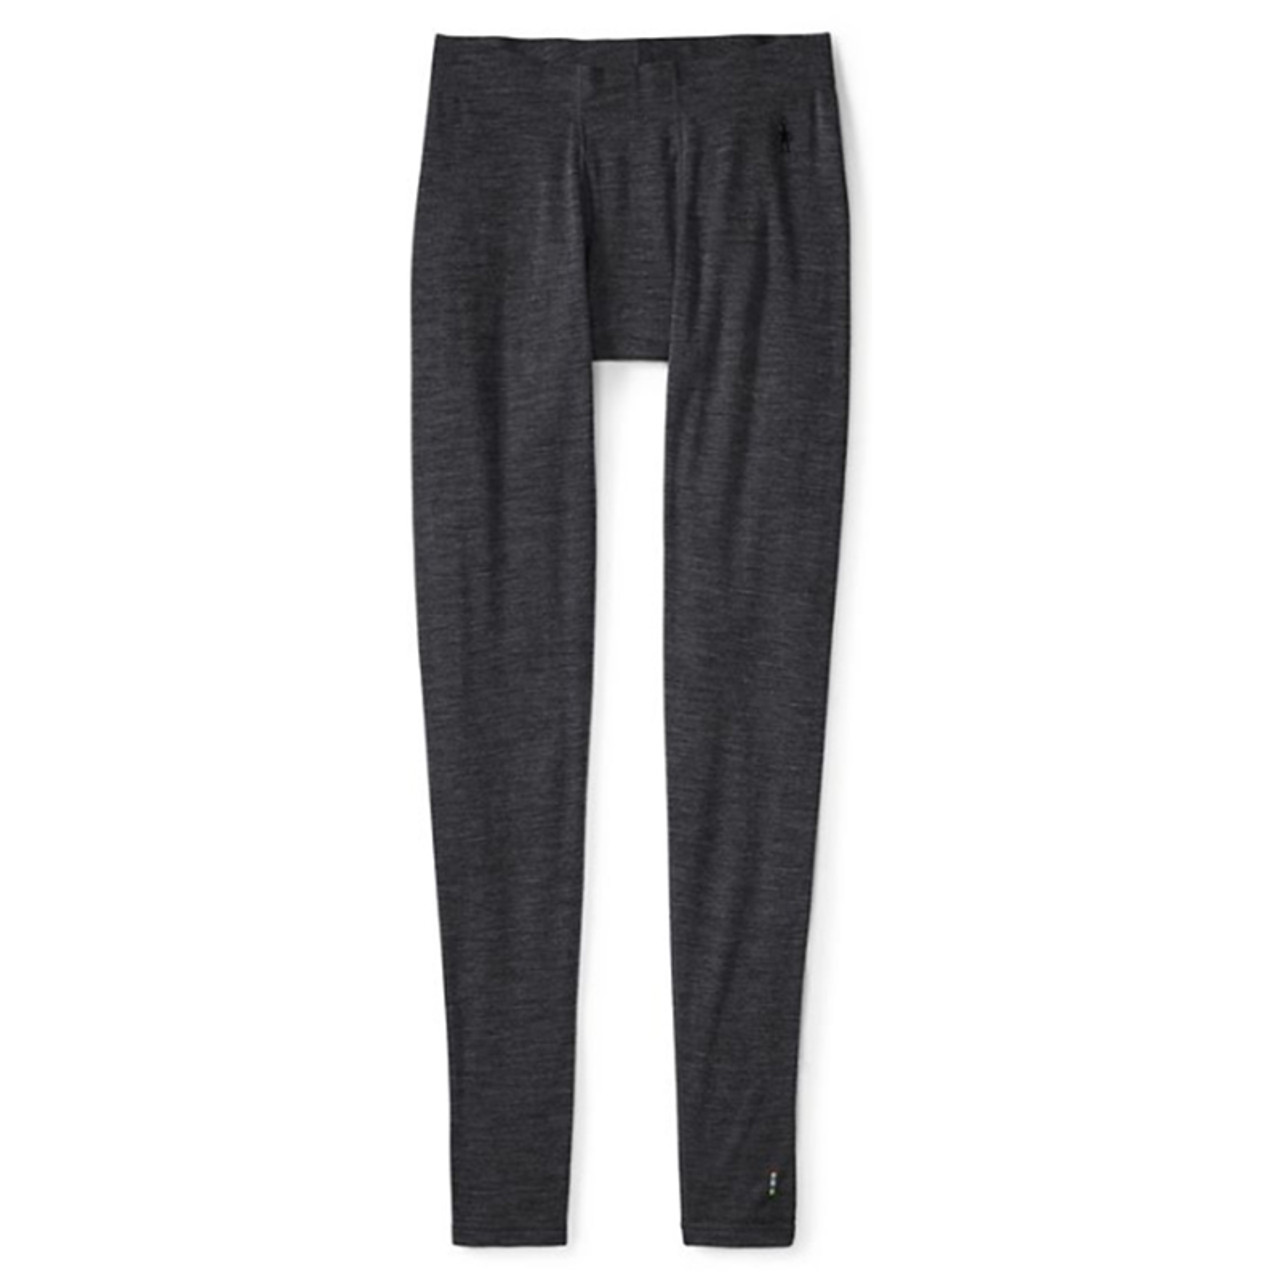 https://cdn11.bigcommerce.com/s-s62r70/images/stencil/1280x1280/products/3564/8103/Smartwool-sw0np605-Mens-Merino-250-Base-Layer-Bottom-charcoal-heather__64783.1540567601.jpg?c=2